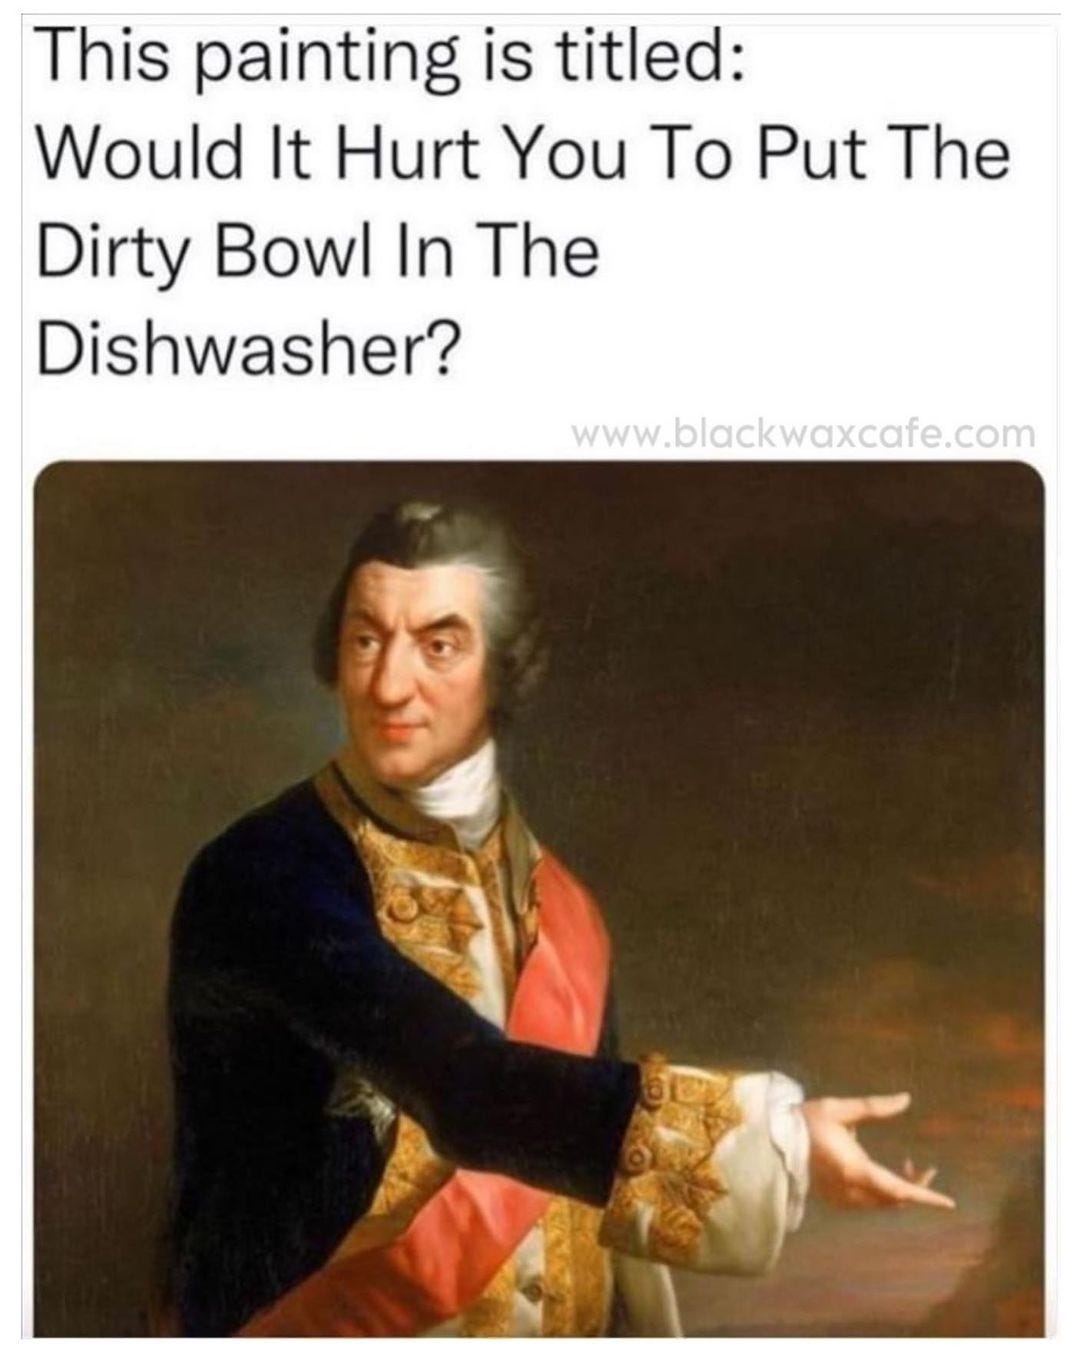 May be an image of 1 person and text that says 'This painting is titled: Would It Hurt You Το Put The Dirty Bowl In The Dishwasher? www.blackwaxcafe.com'